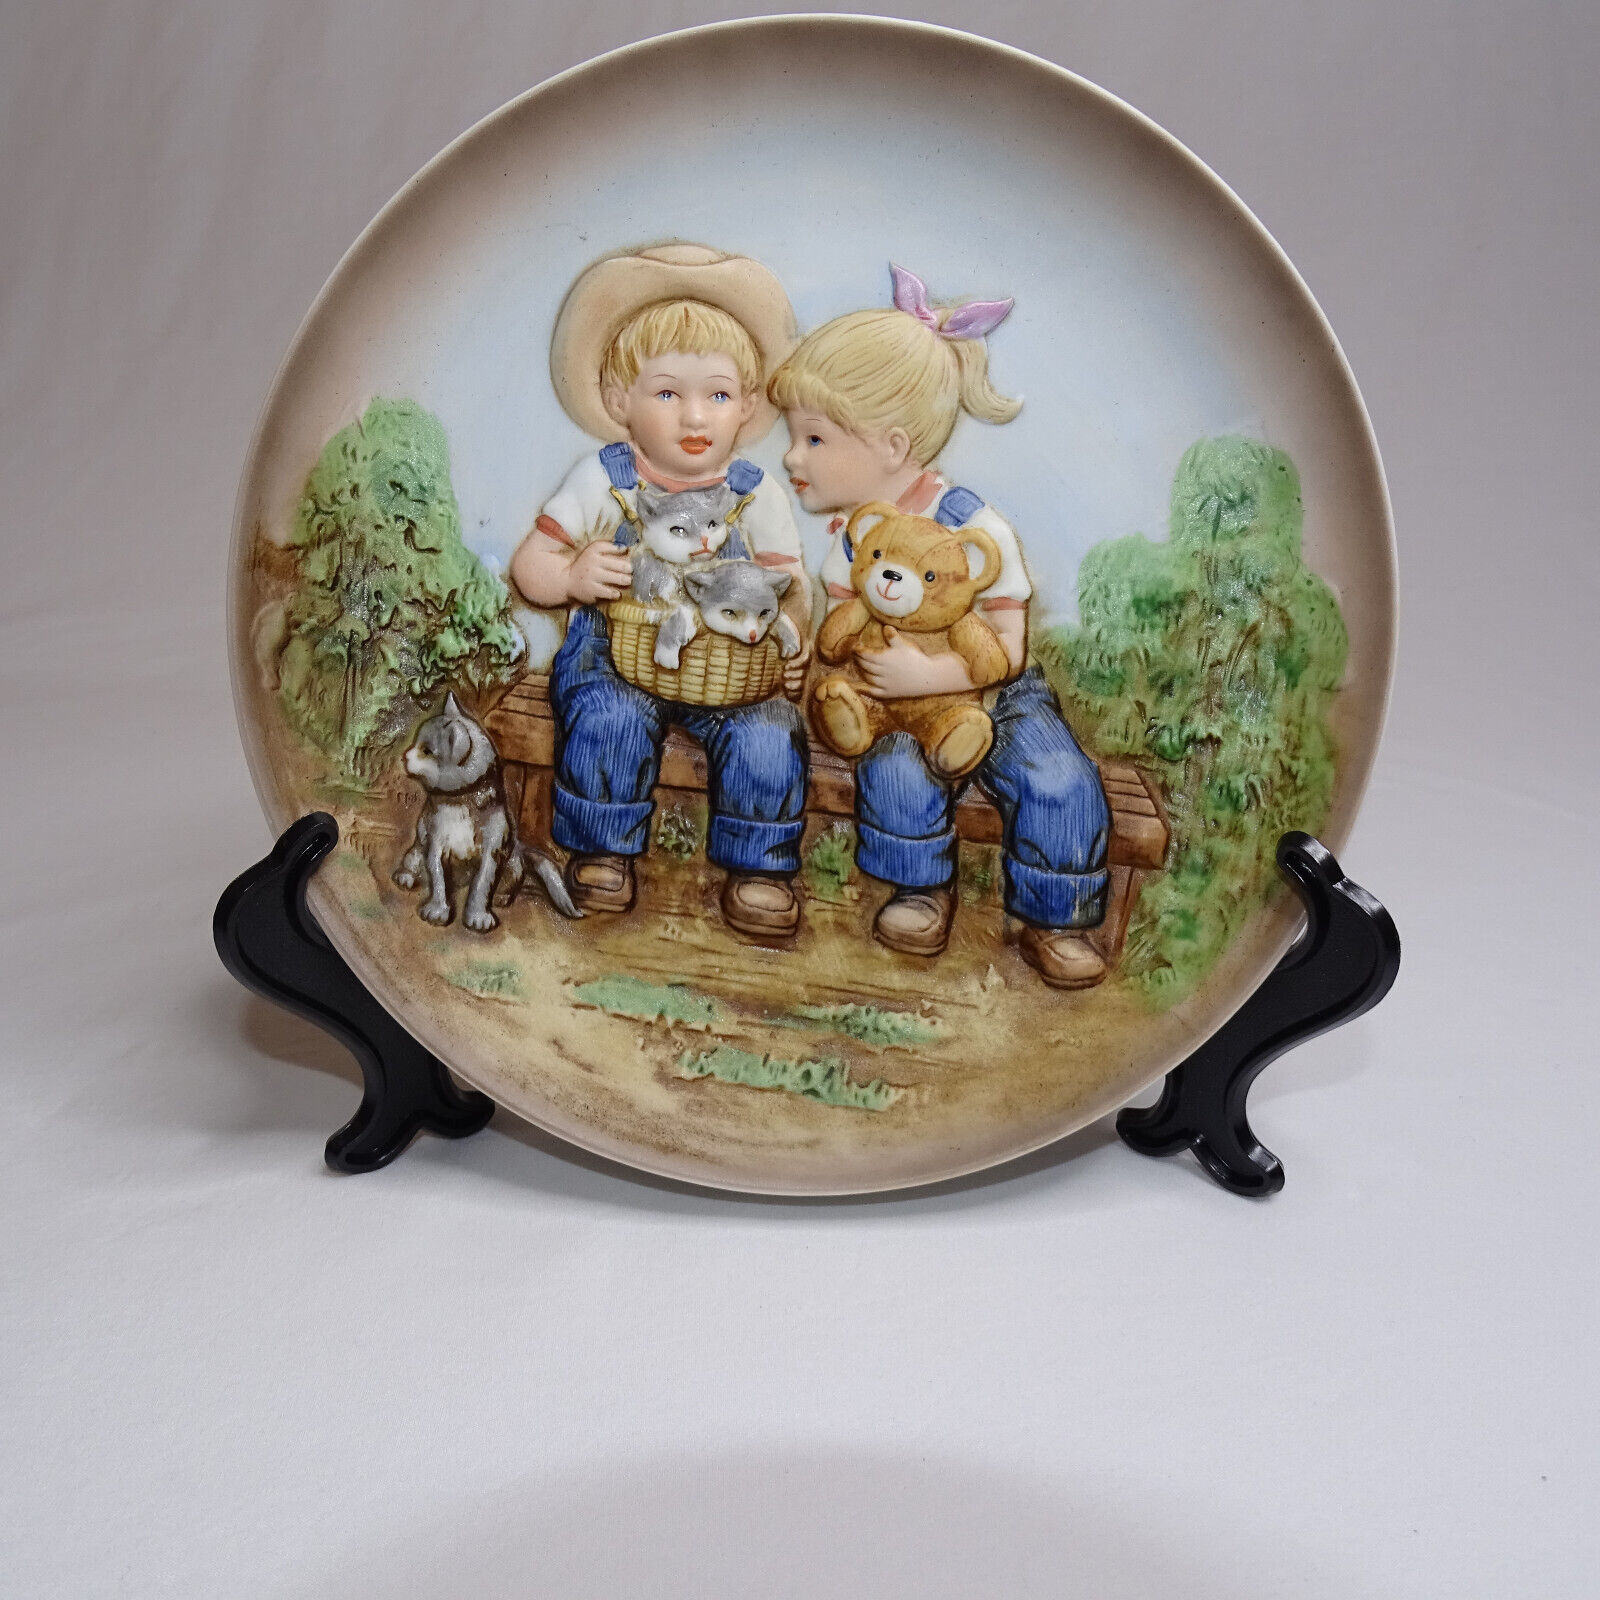 VINTAGE DENIM DAYS COLLECTORS PLATE BY HOMCO  1985 Colorful Detailed Plate Nice - $10.70